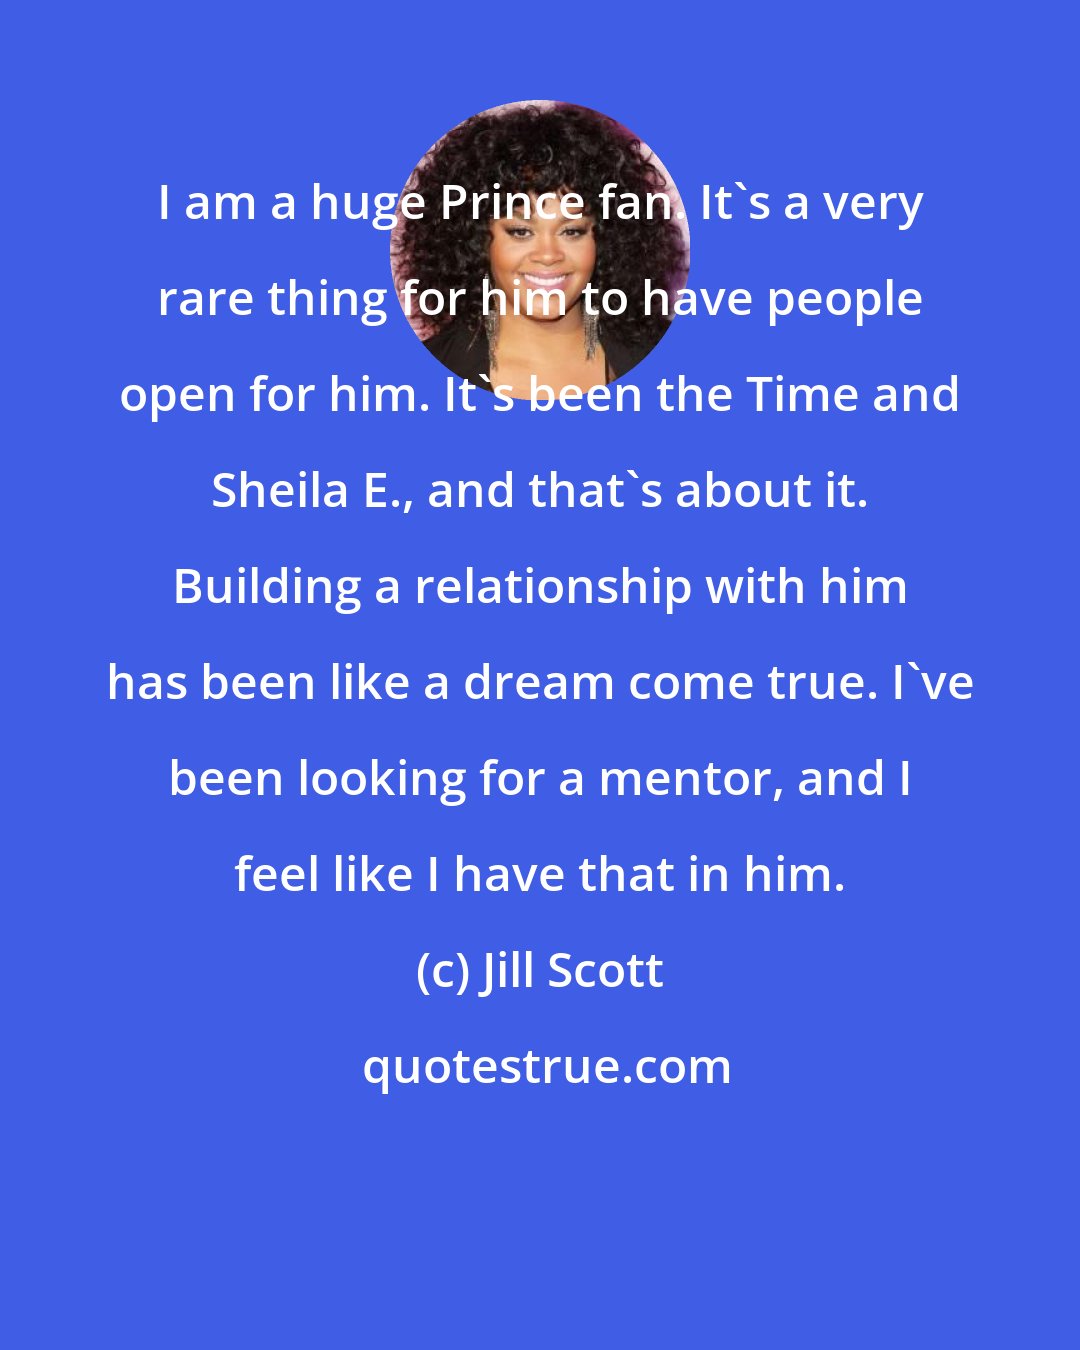 Jill Scott: I am a huge Prince fan. It's a very rare thing for him to have people open for him. It's been the Time and Sheila E., and that's about it. Building a relationship with him has been like a dream come true. I've been looking for a mentor, and I feel like I have that in him.